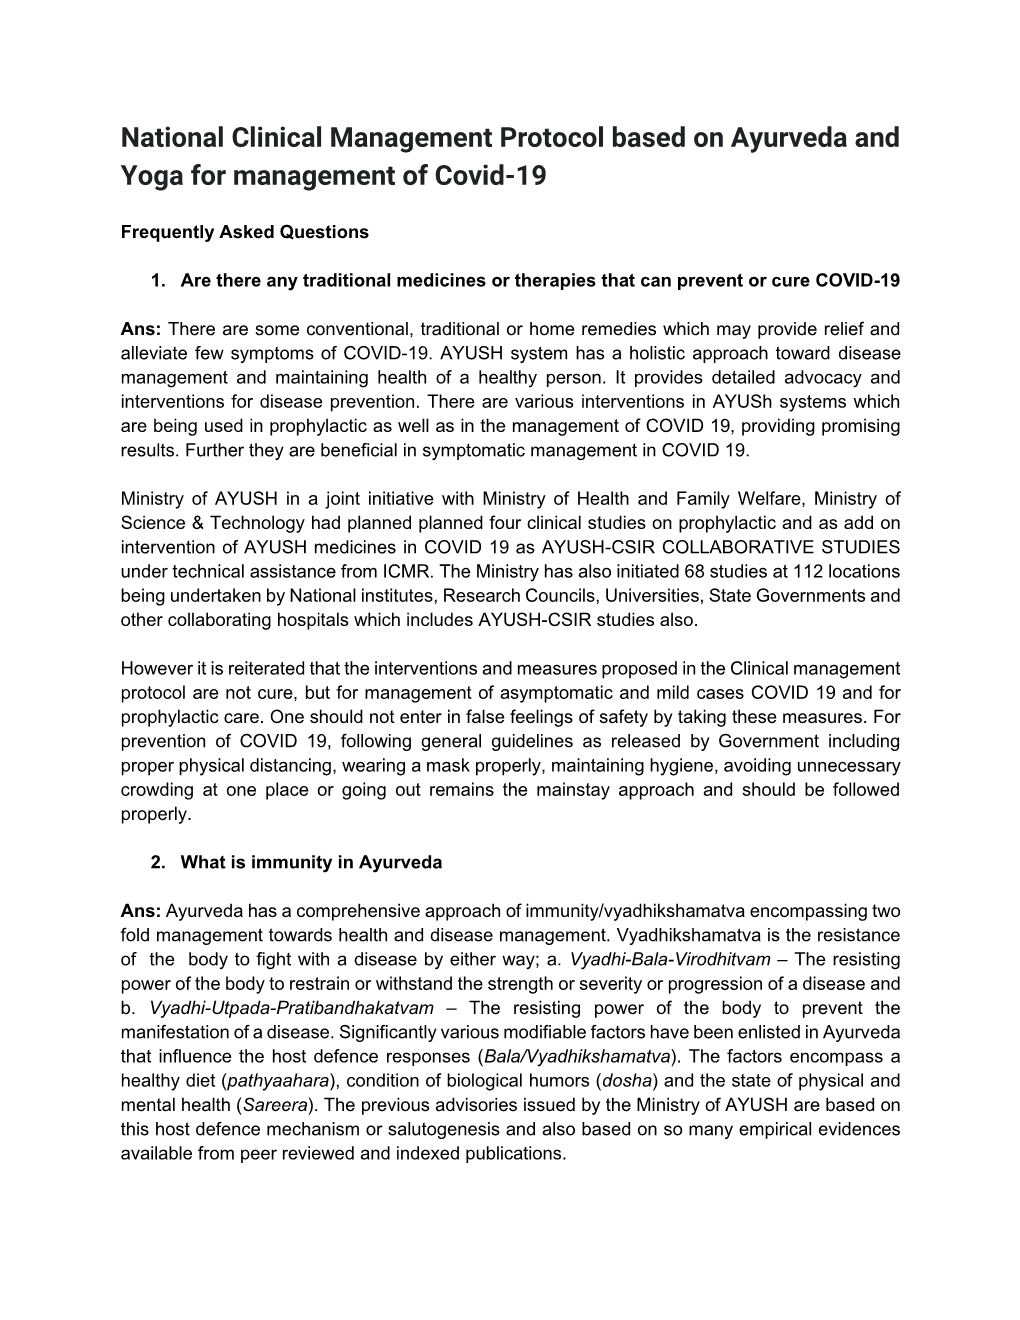 National Clinical Management Protocol Based on Ayurveda and Yoga for Management of Covid-19